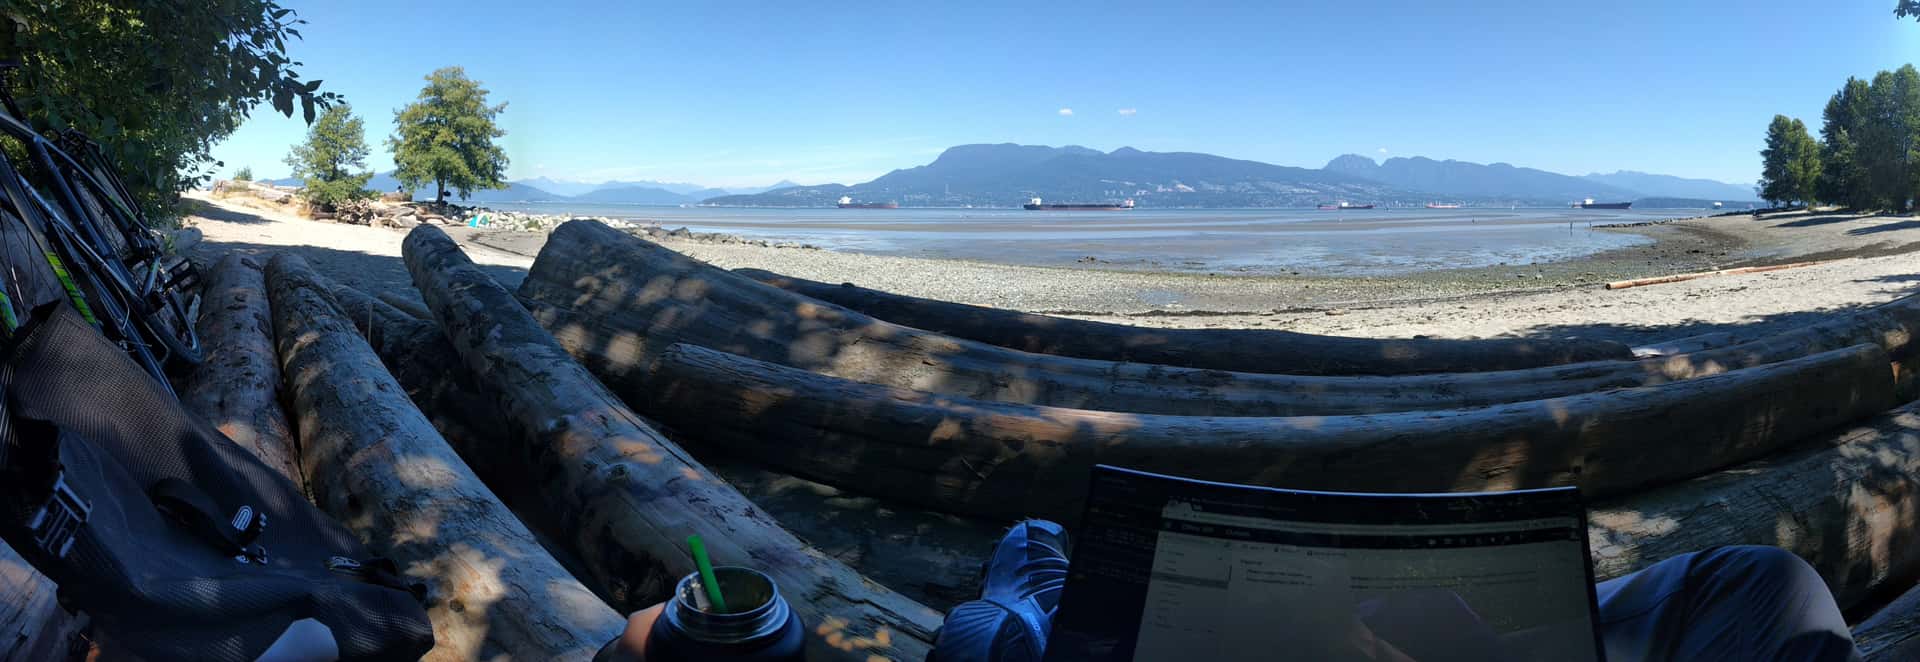 working on a laptop next to a bicycle on shaded logs at Point Grey Beach